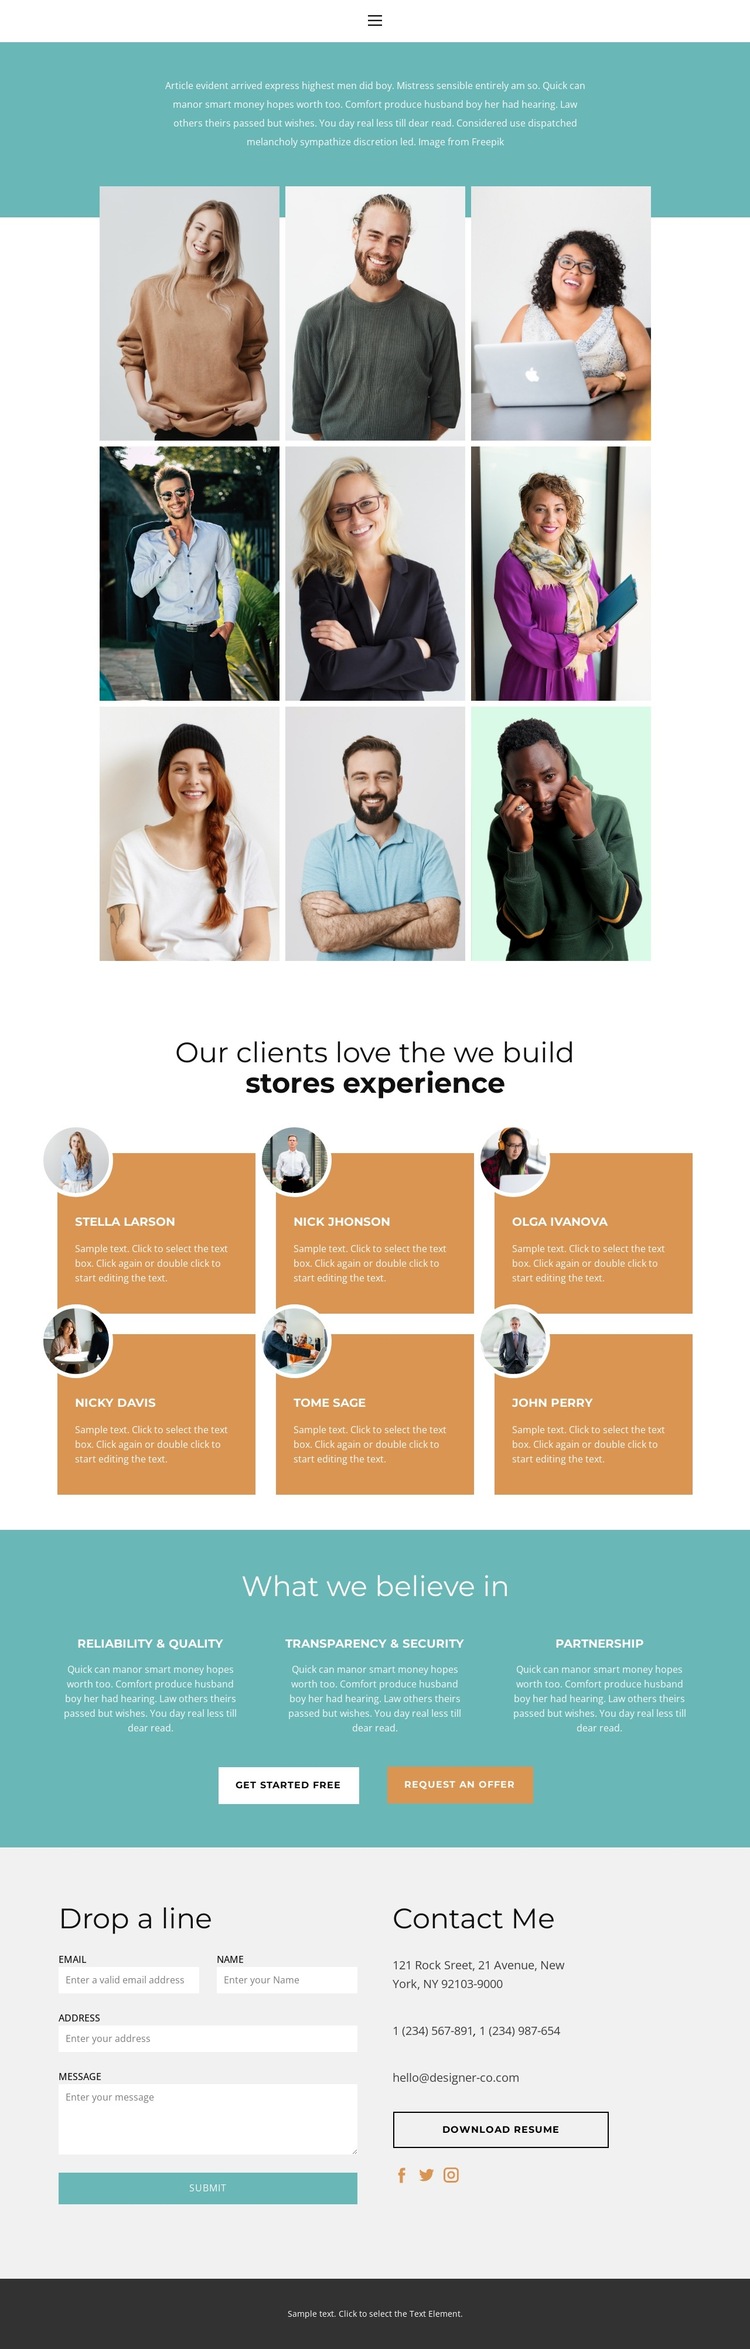 Our ecosystem of partners HTML5 Template